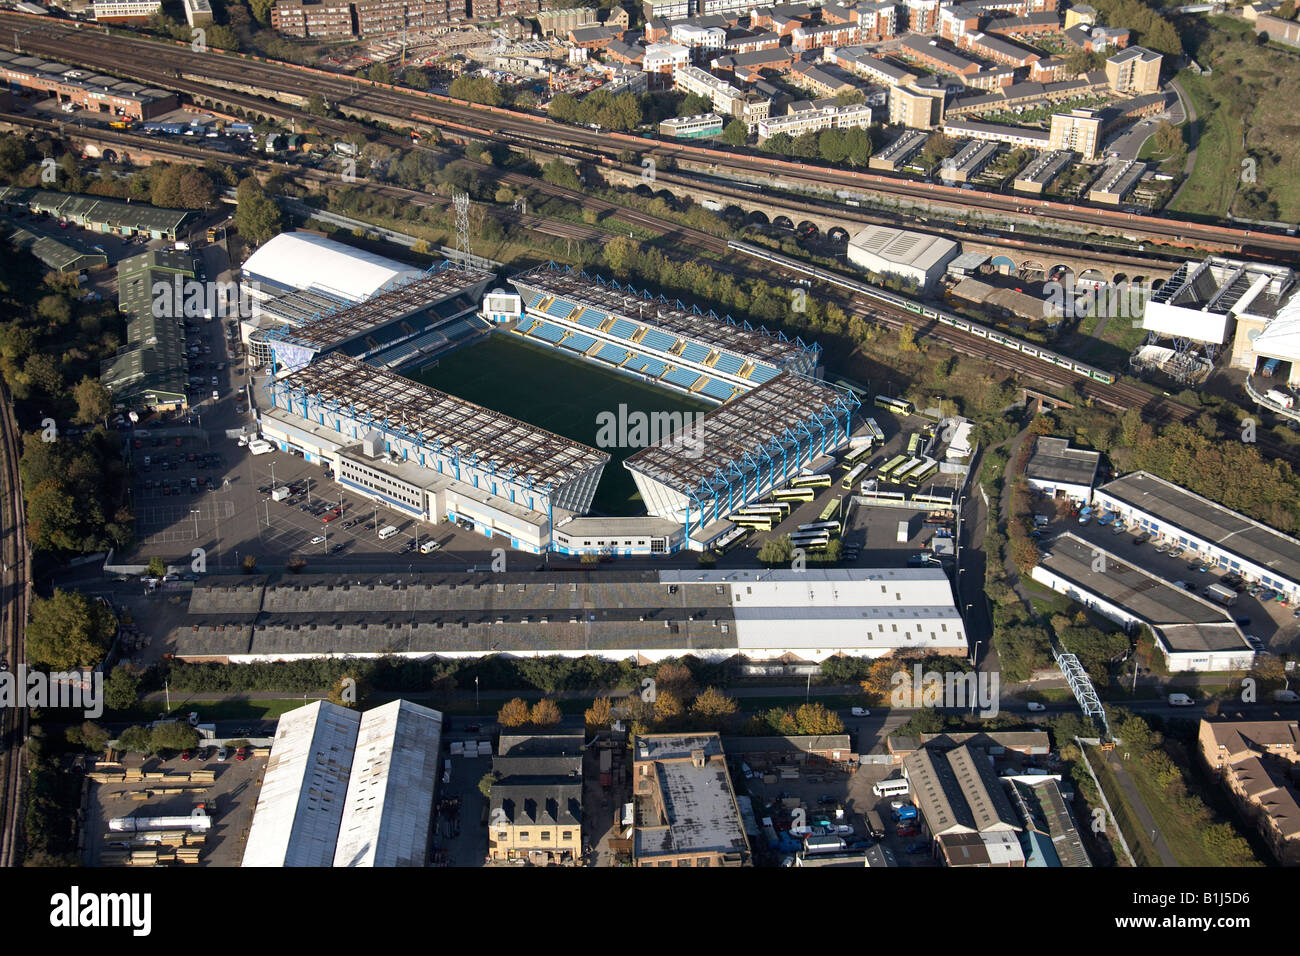 Aerial view north east of Millwall Football Ground South Bermondsey London SE16 England UK Stock Photo